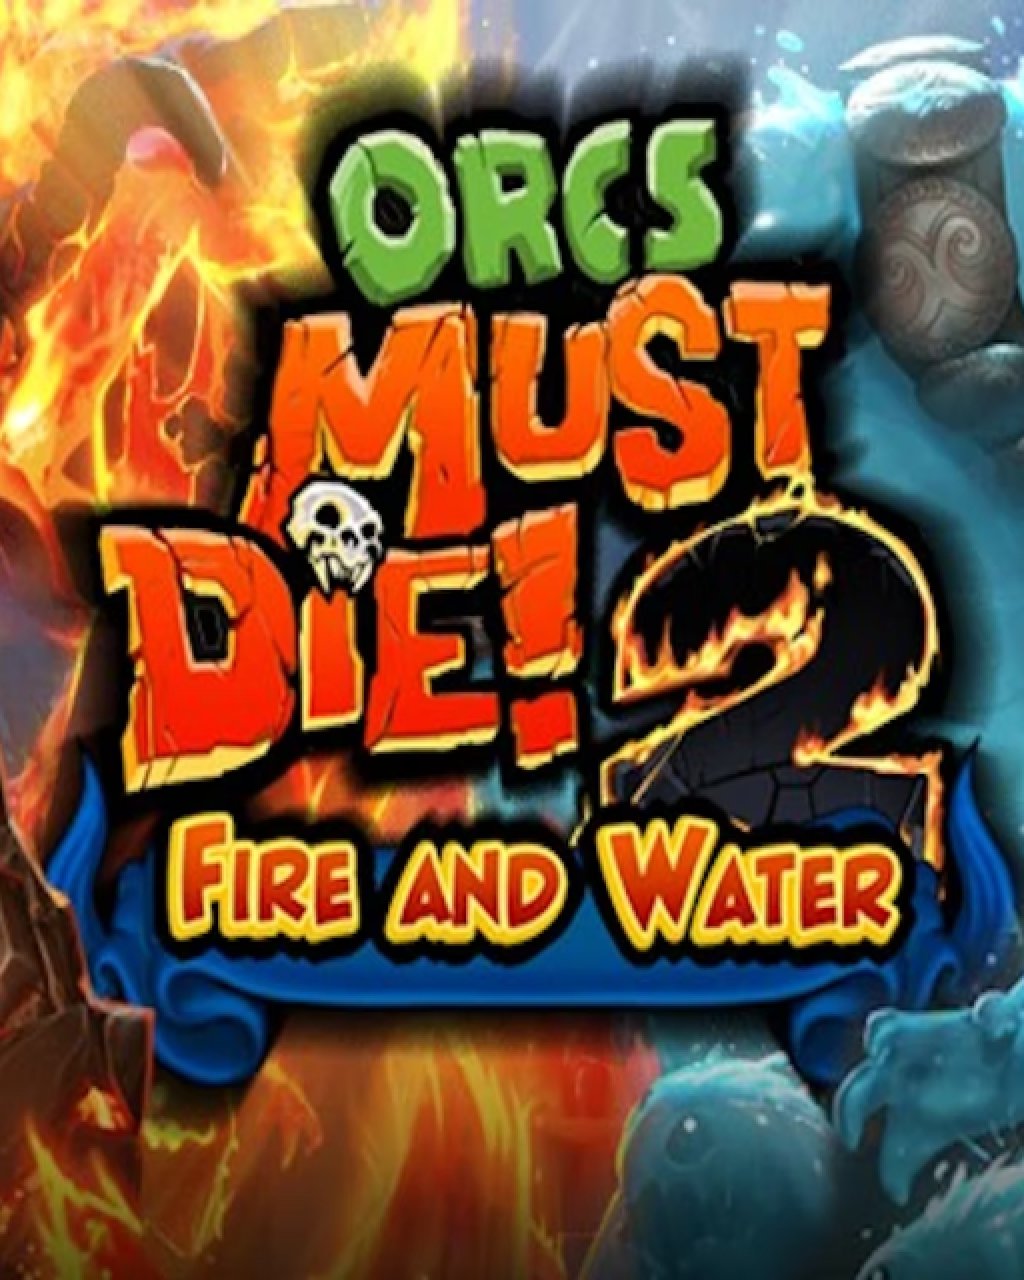 Orcs Must Die 2! Fire and Water Booster Pack